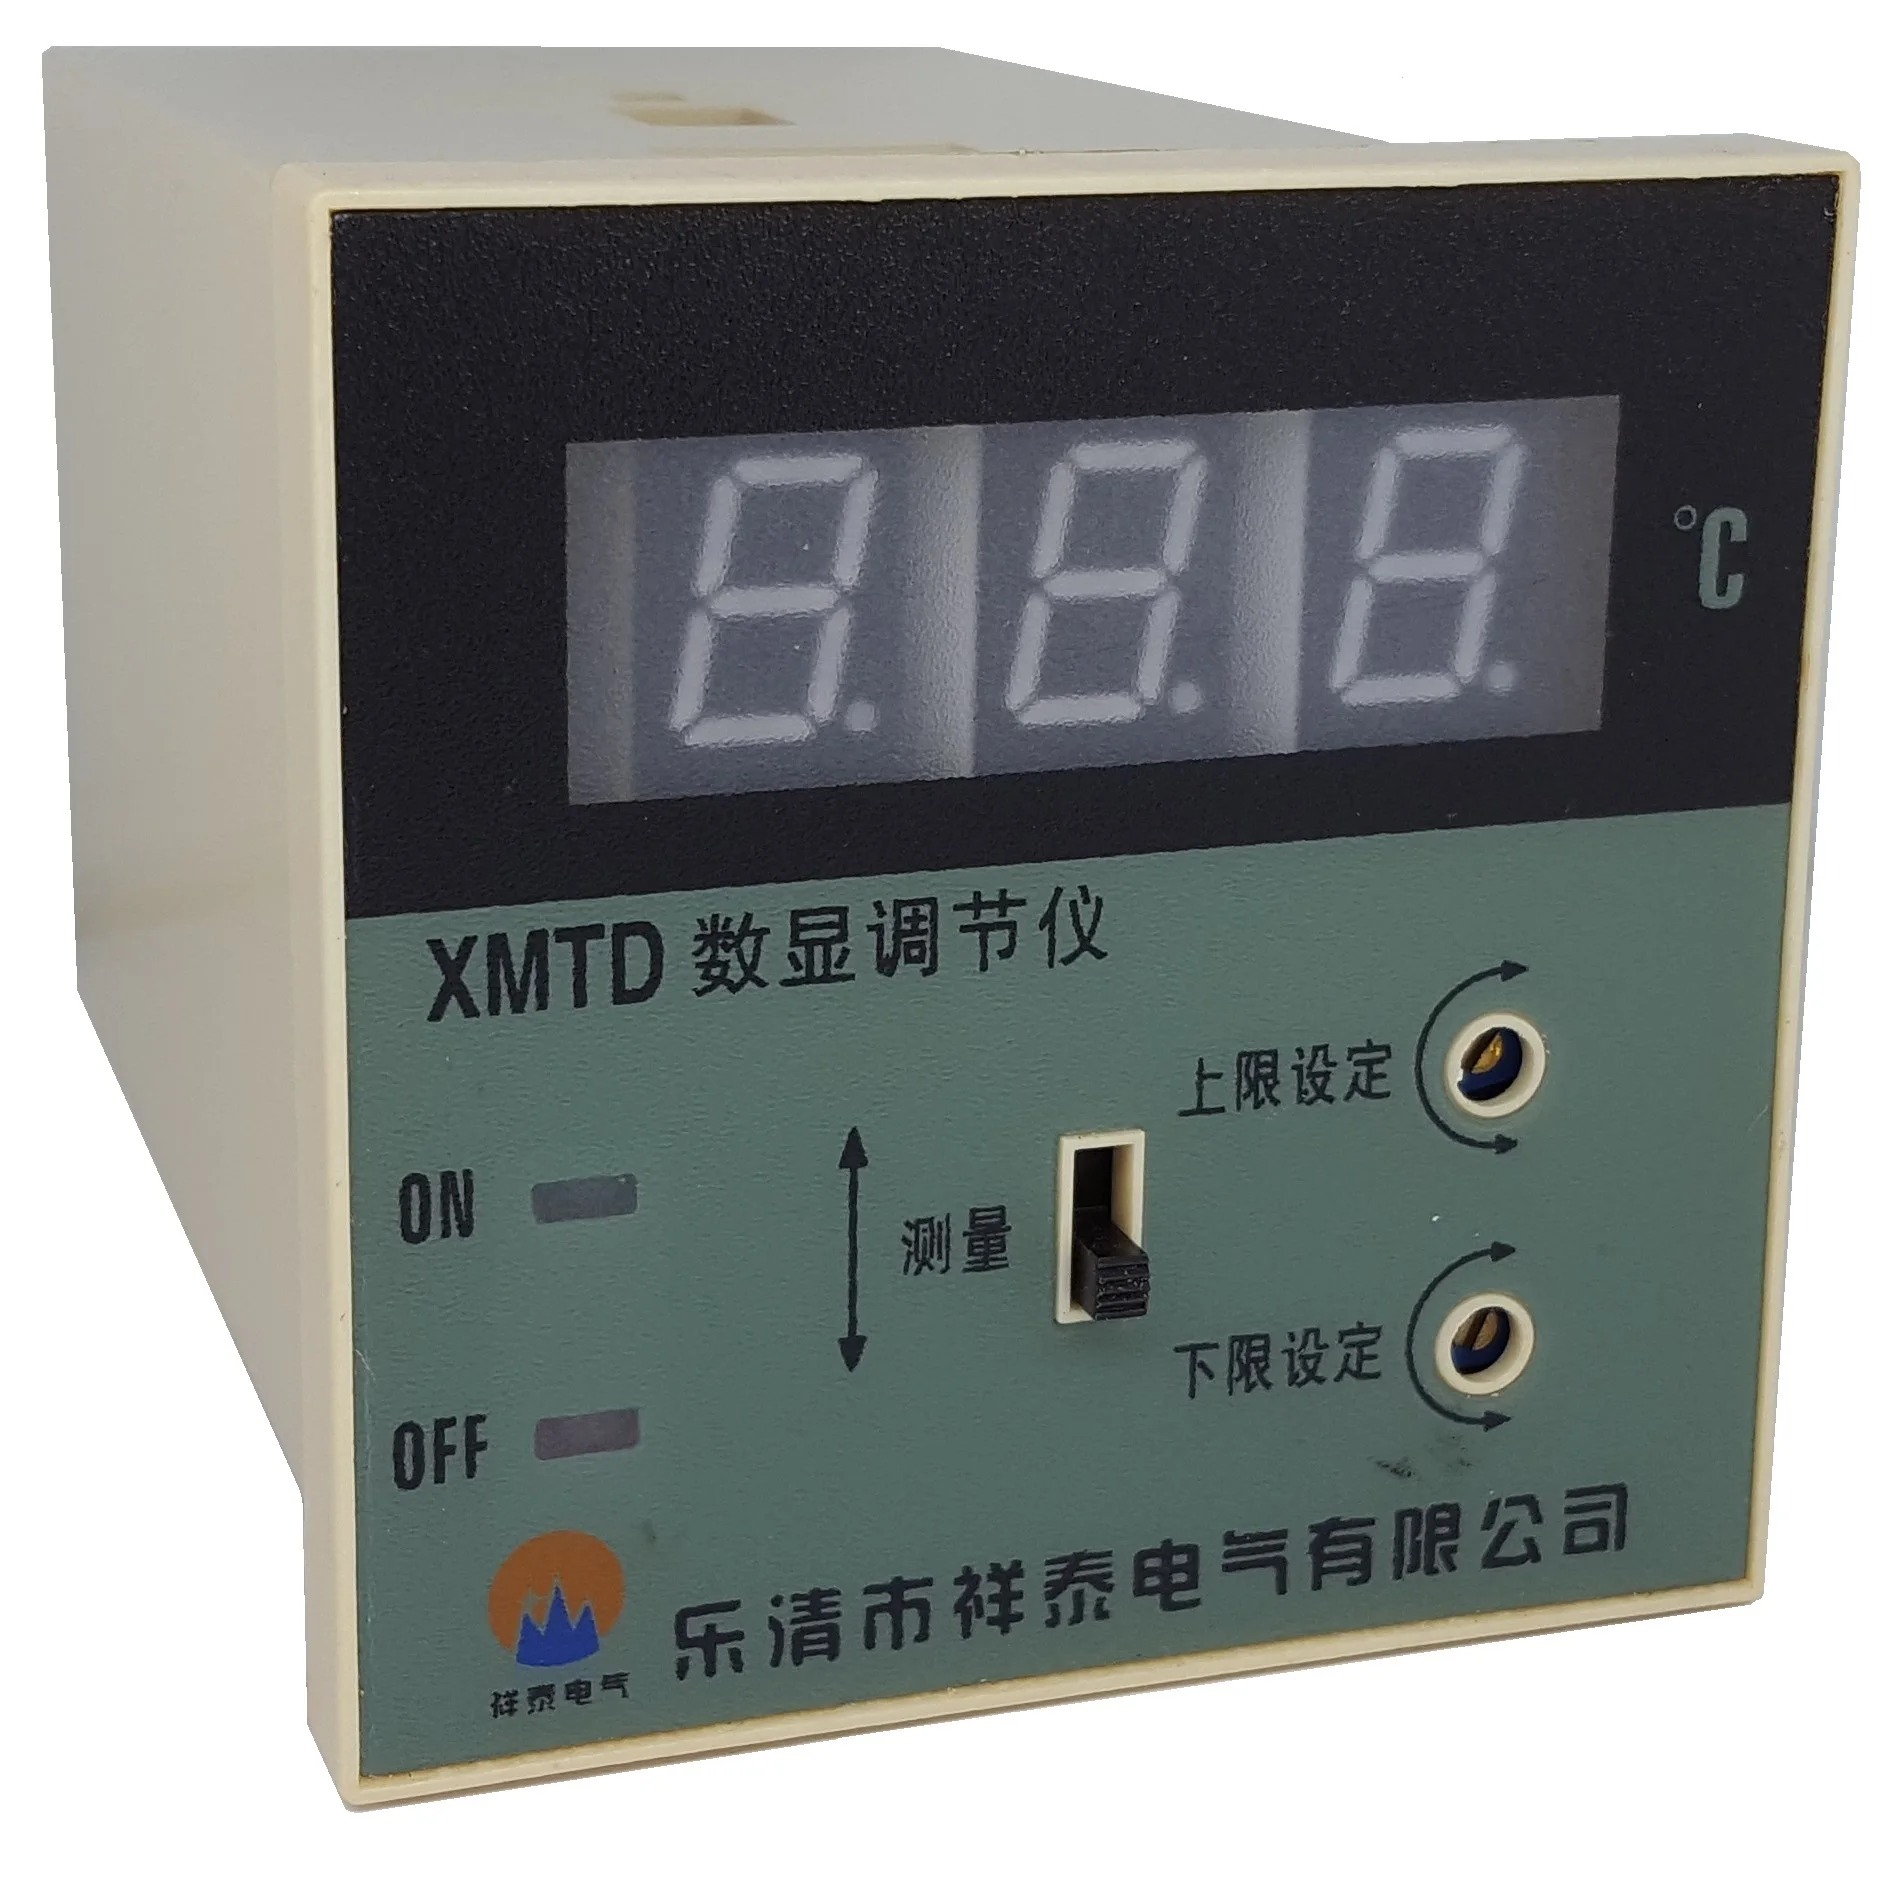 

TAIZHOU Electrical Appliance Instrument XMTD-2202 Digital Temperature Controller relay PT100 0-400 Genuine Product Oven-5pcs